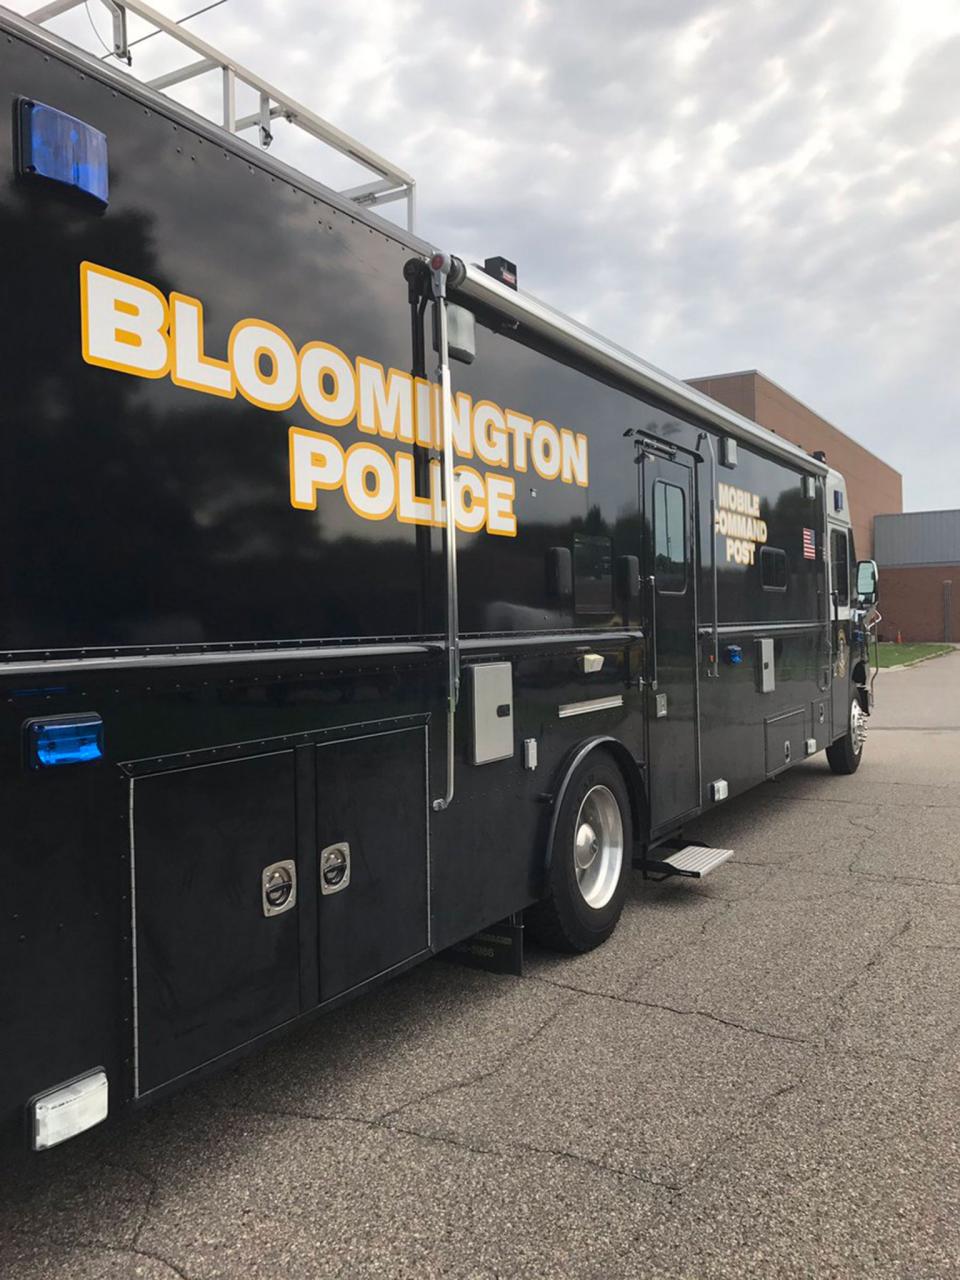 <p>A Police mobile command post vehicle is parked at the explosion site at the Dar Al-Farooq Islamic Center in Bloomington, Minn., on Aug. 5, 2017. (Photo: Bloomington Police‏ via Twitter) </p>